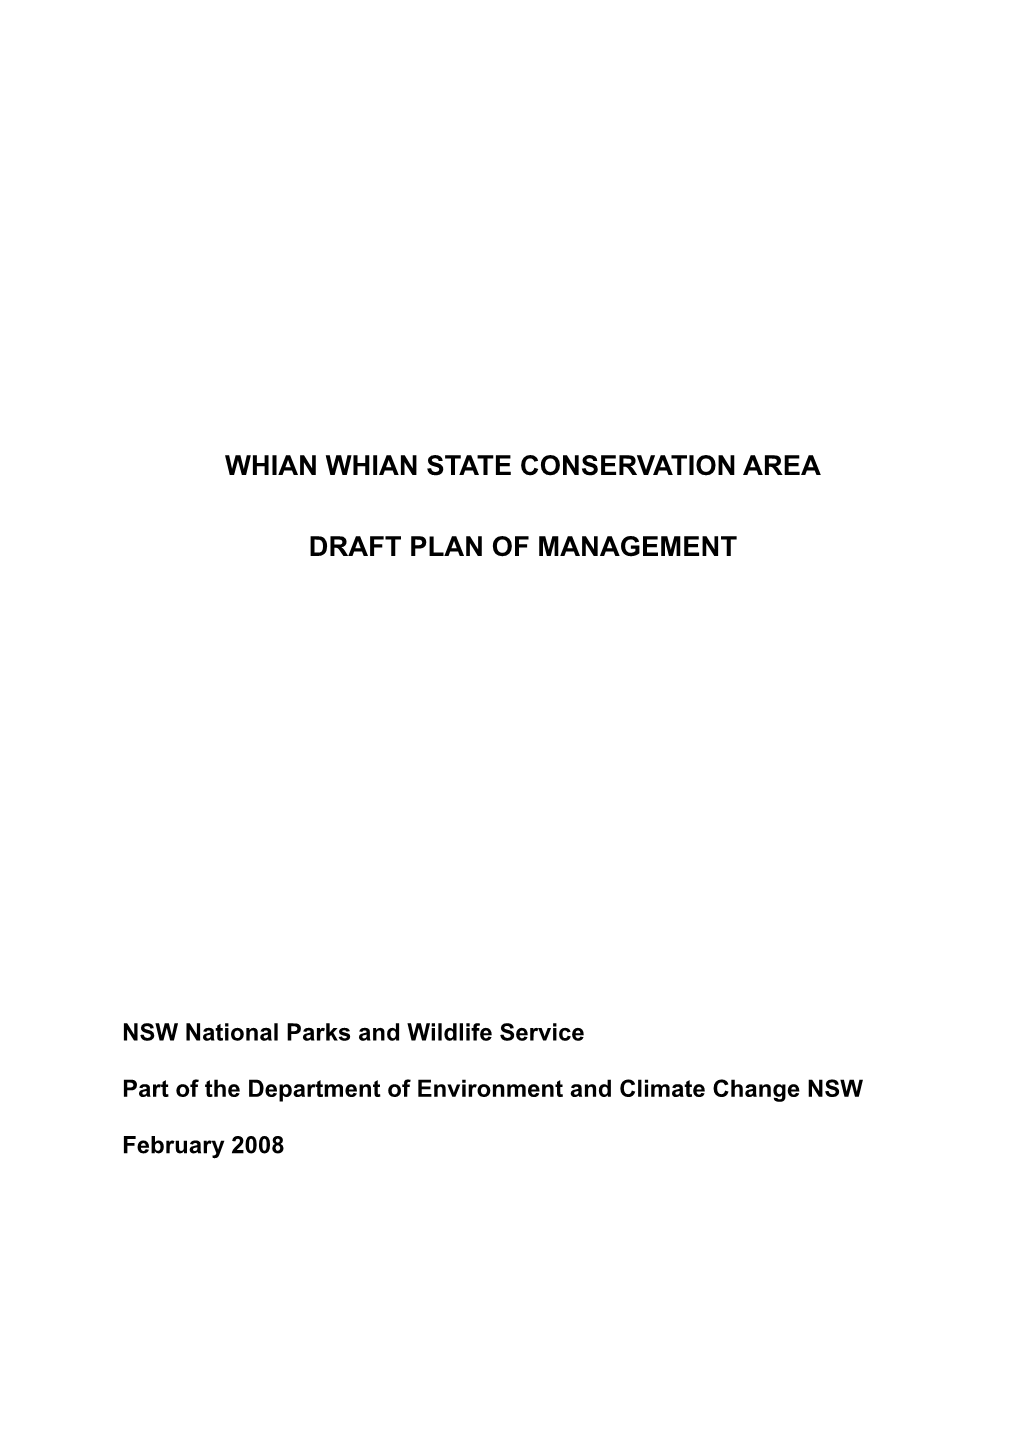 Whian Whian State Conservation Area Draft